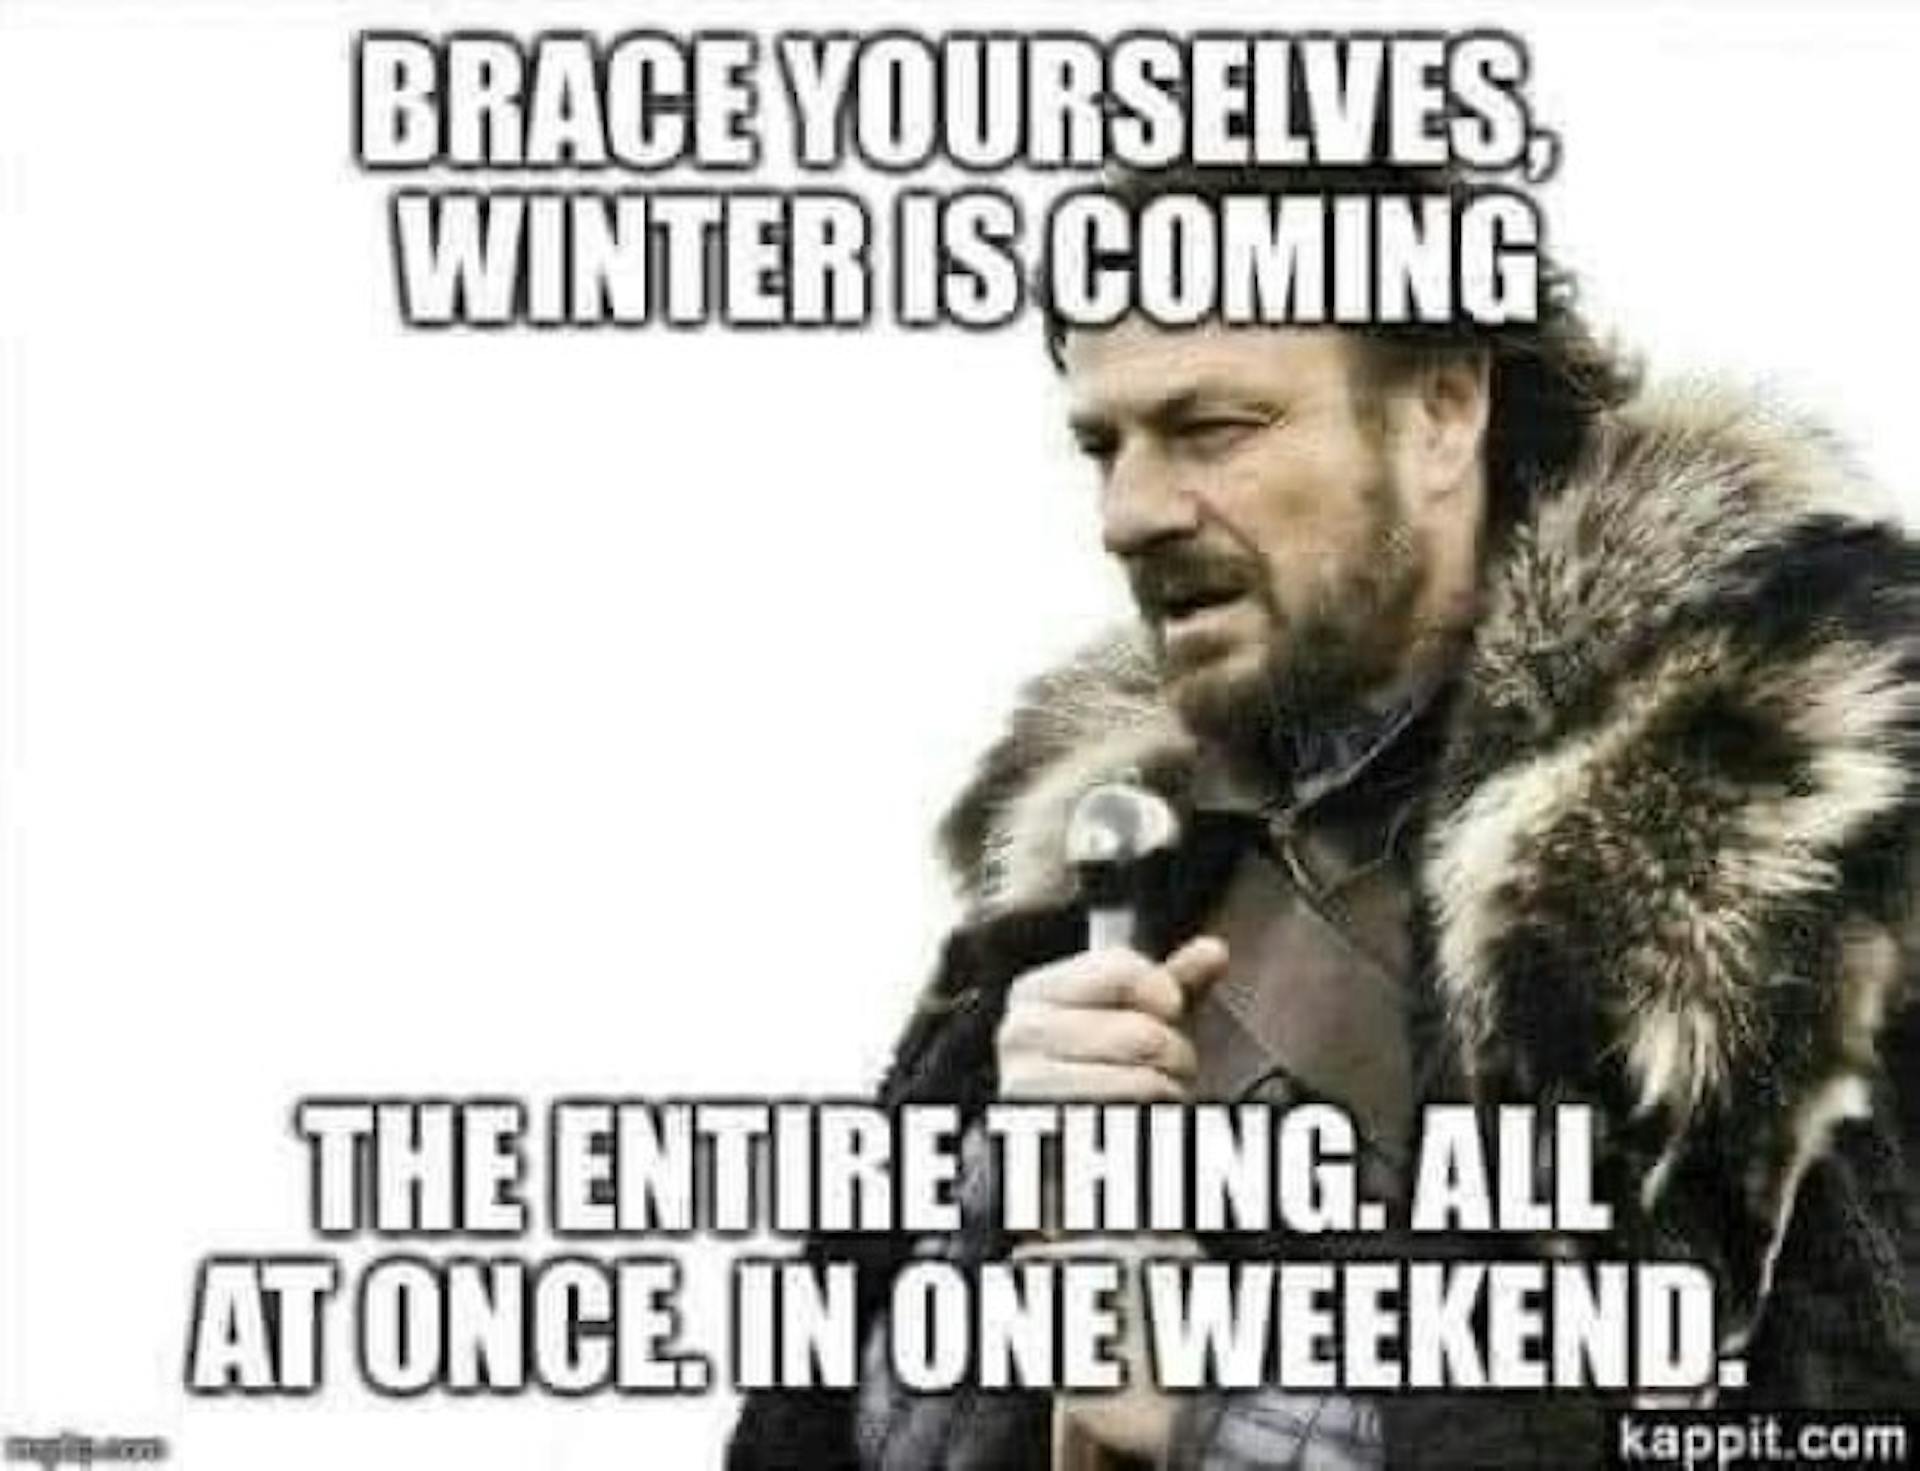 Brace yourself - winter is coming. The entire thing. All at once. In one weekend.